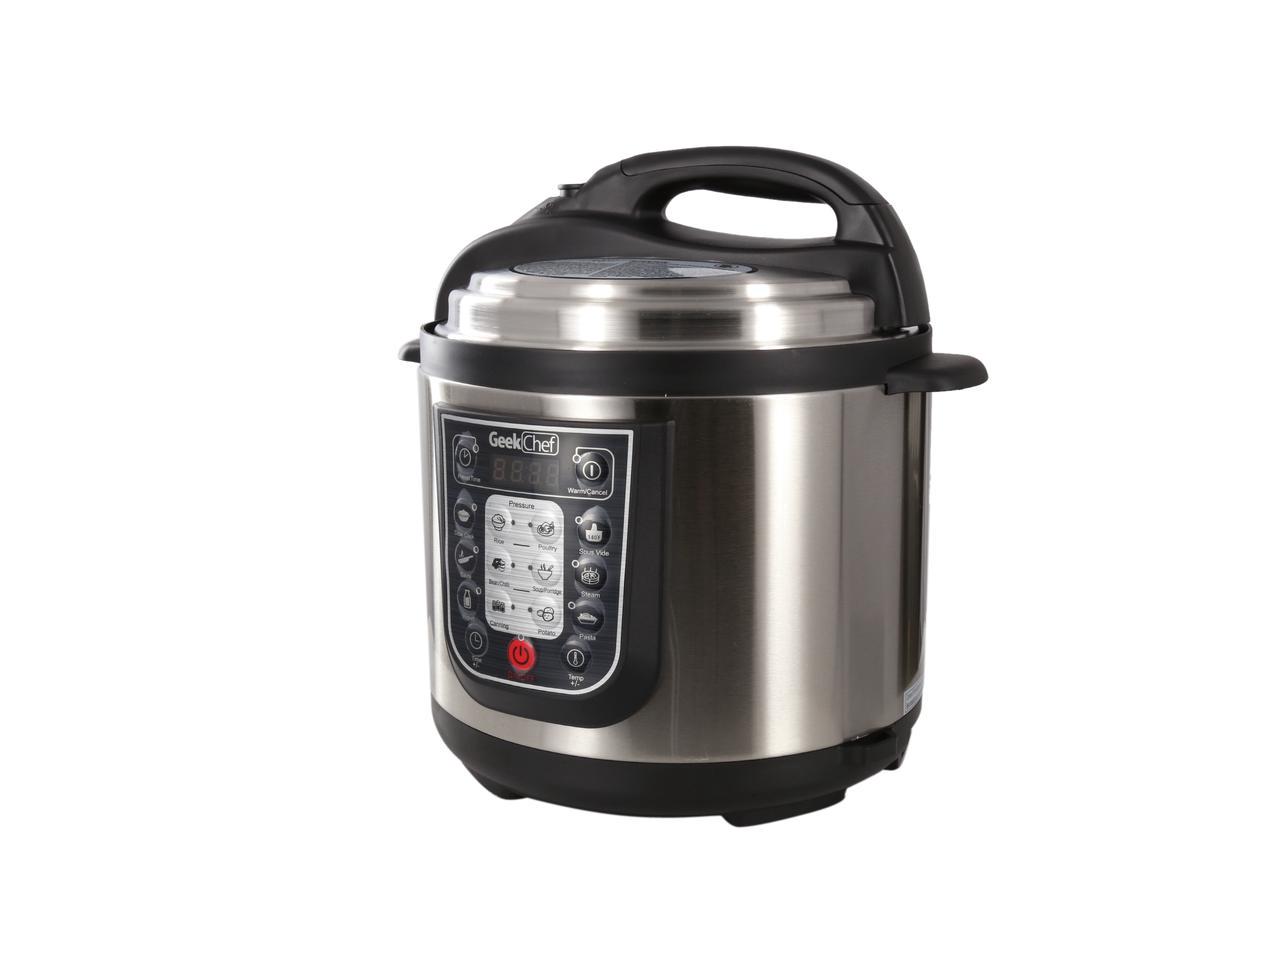 Today only: GeekChef 11-in-1 electric pressure cooker for $60